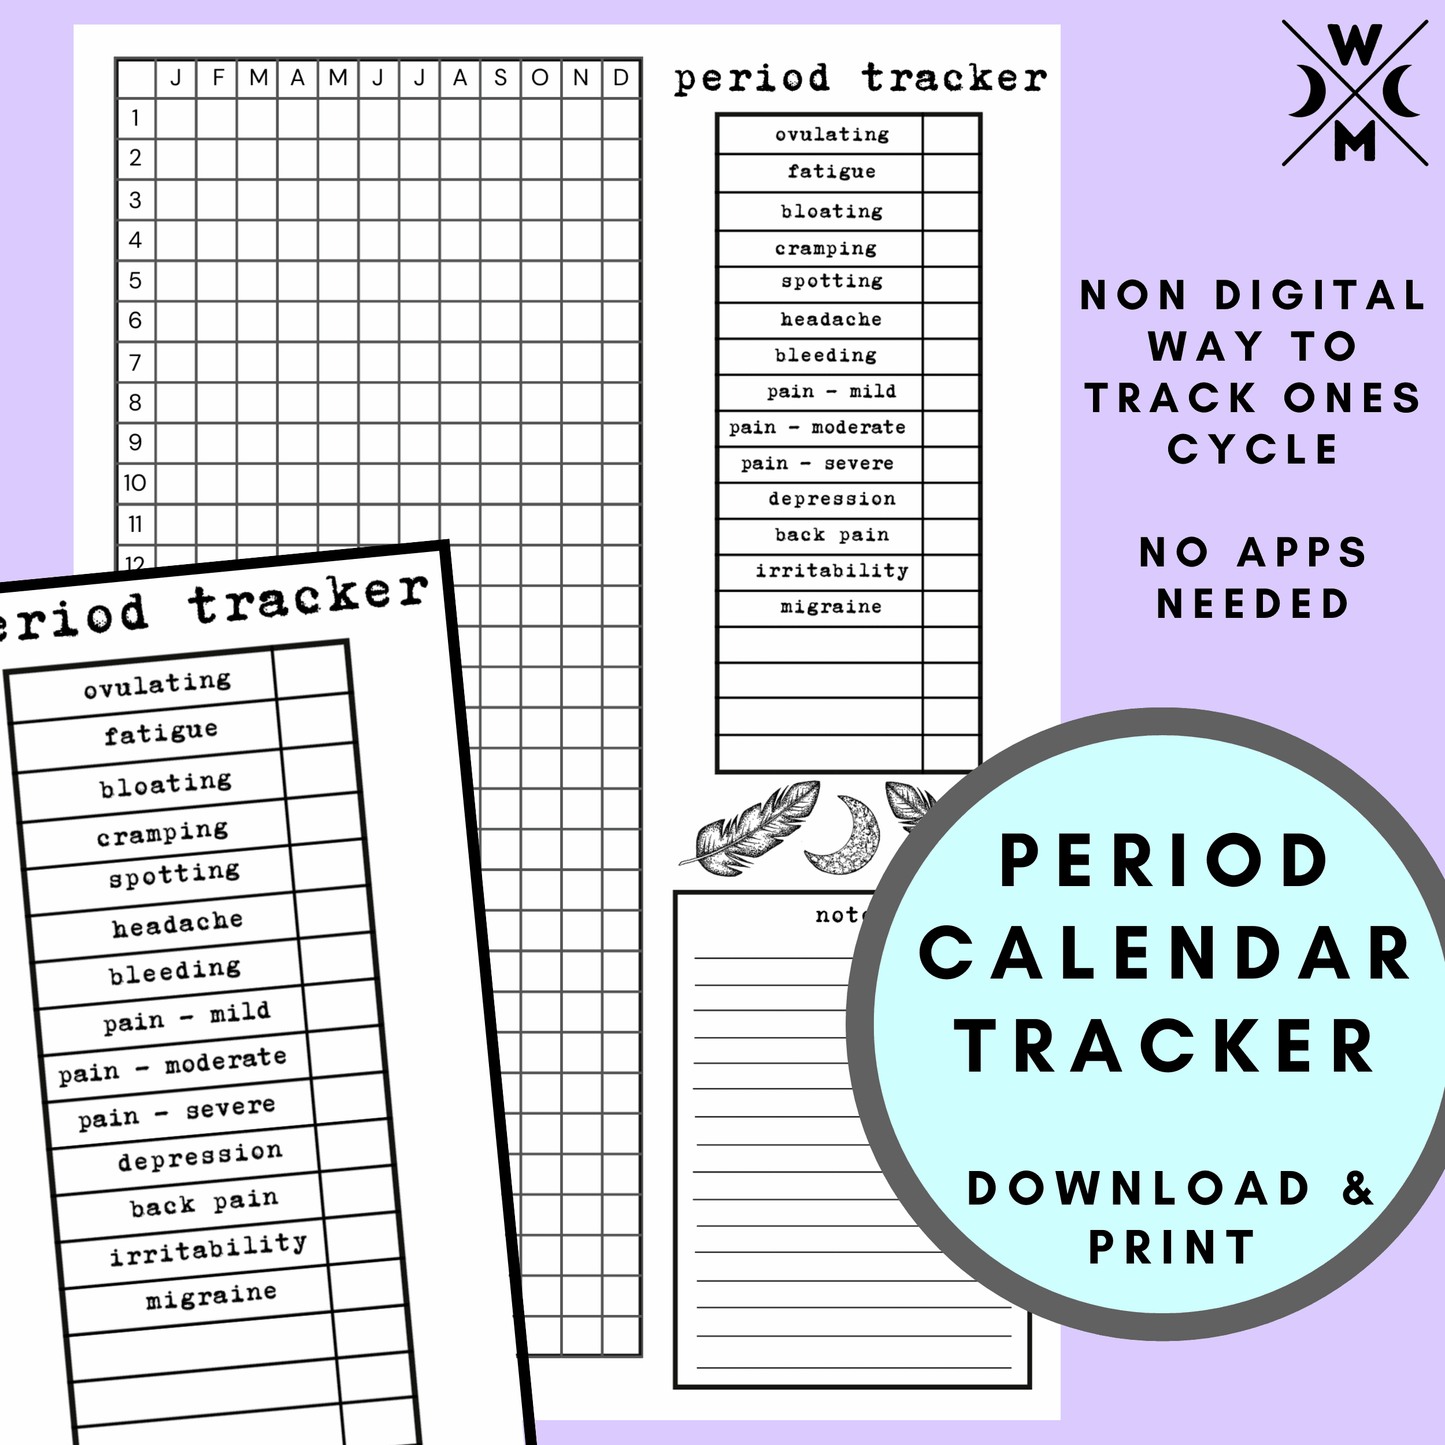 the yearly period tracker that’s included, in black and white 